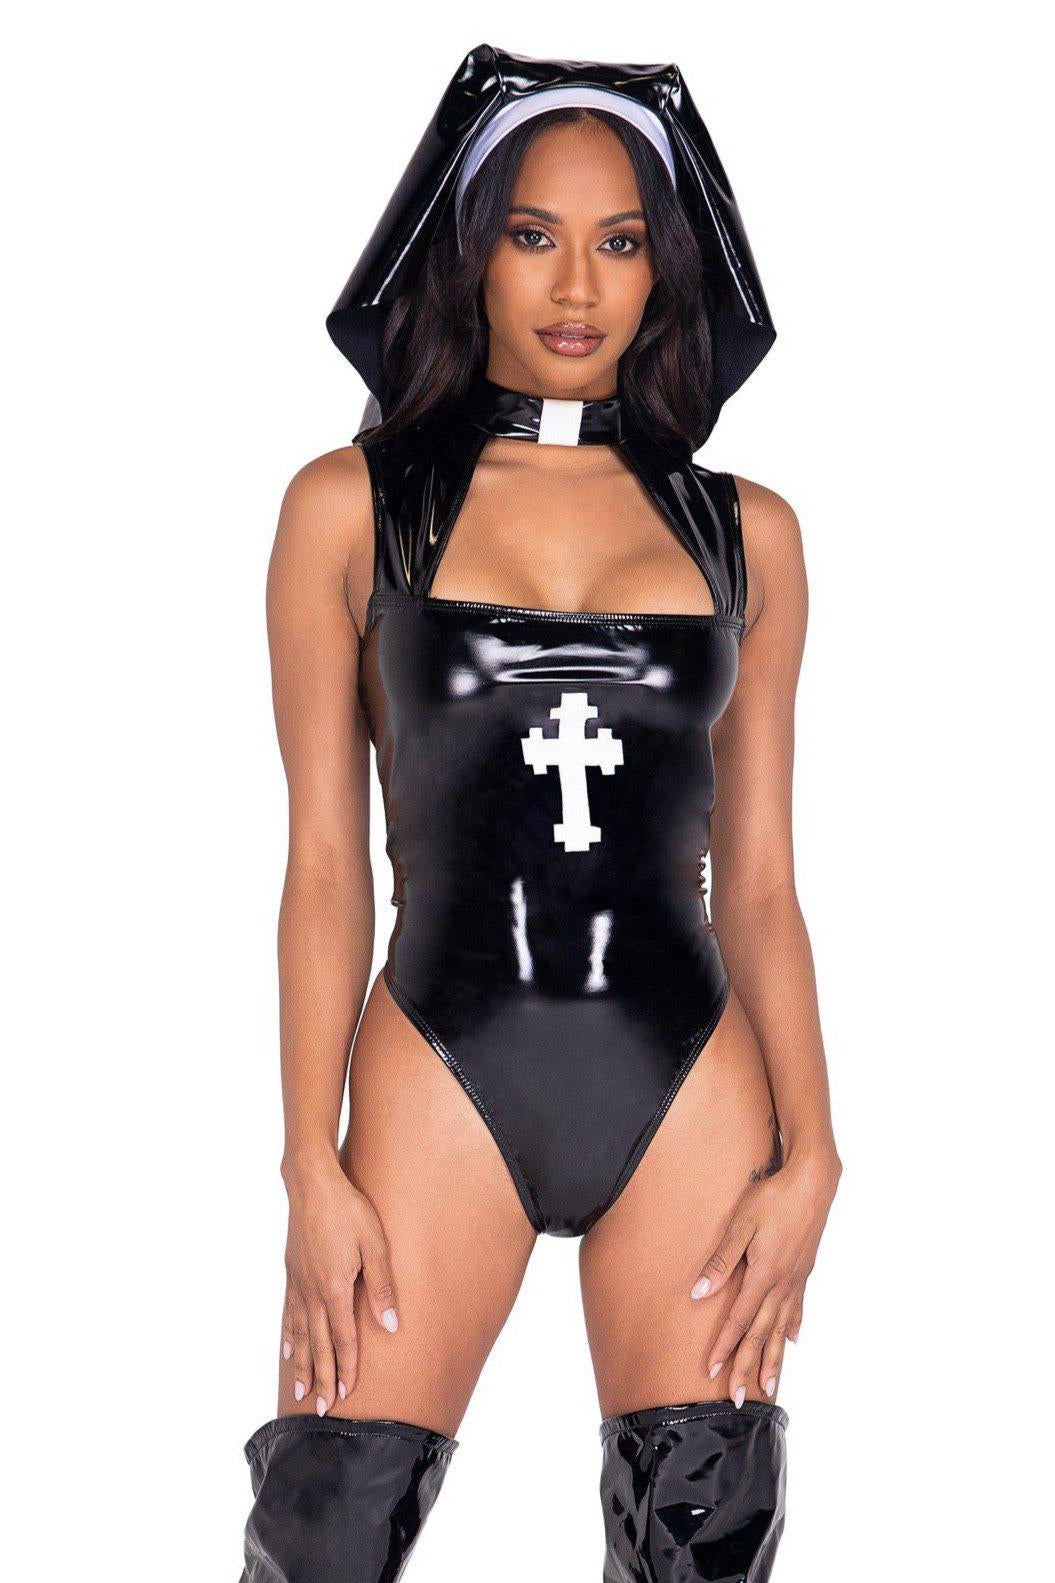 Misbeheaven Nun Costume-Fairytale Costumes-Roma Costumes-SEXYSHOES.COM